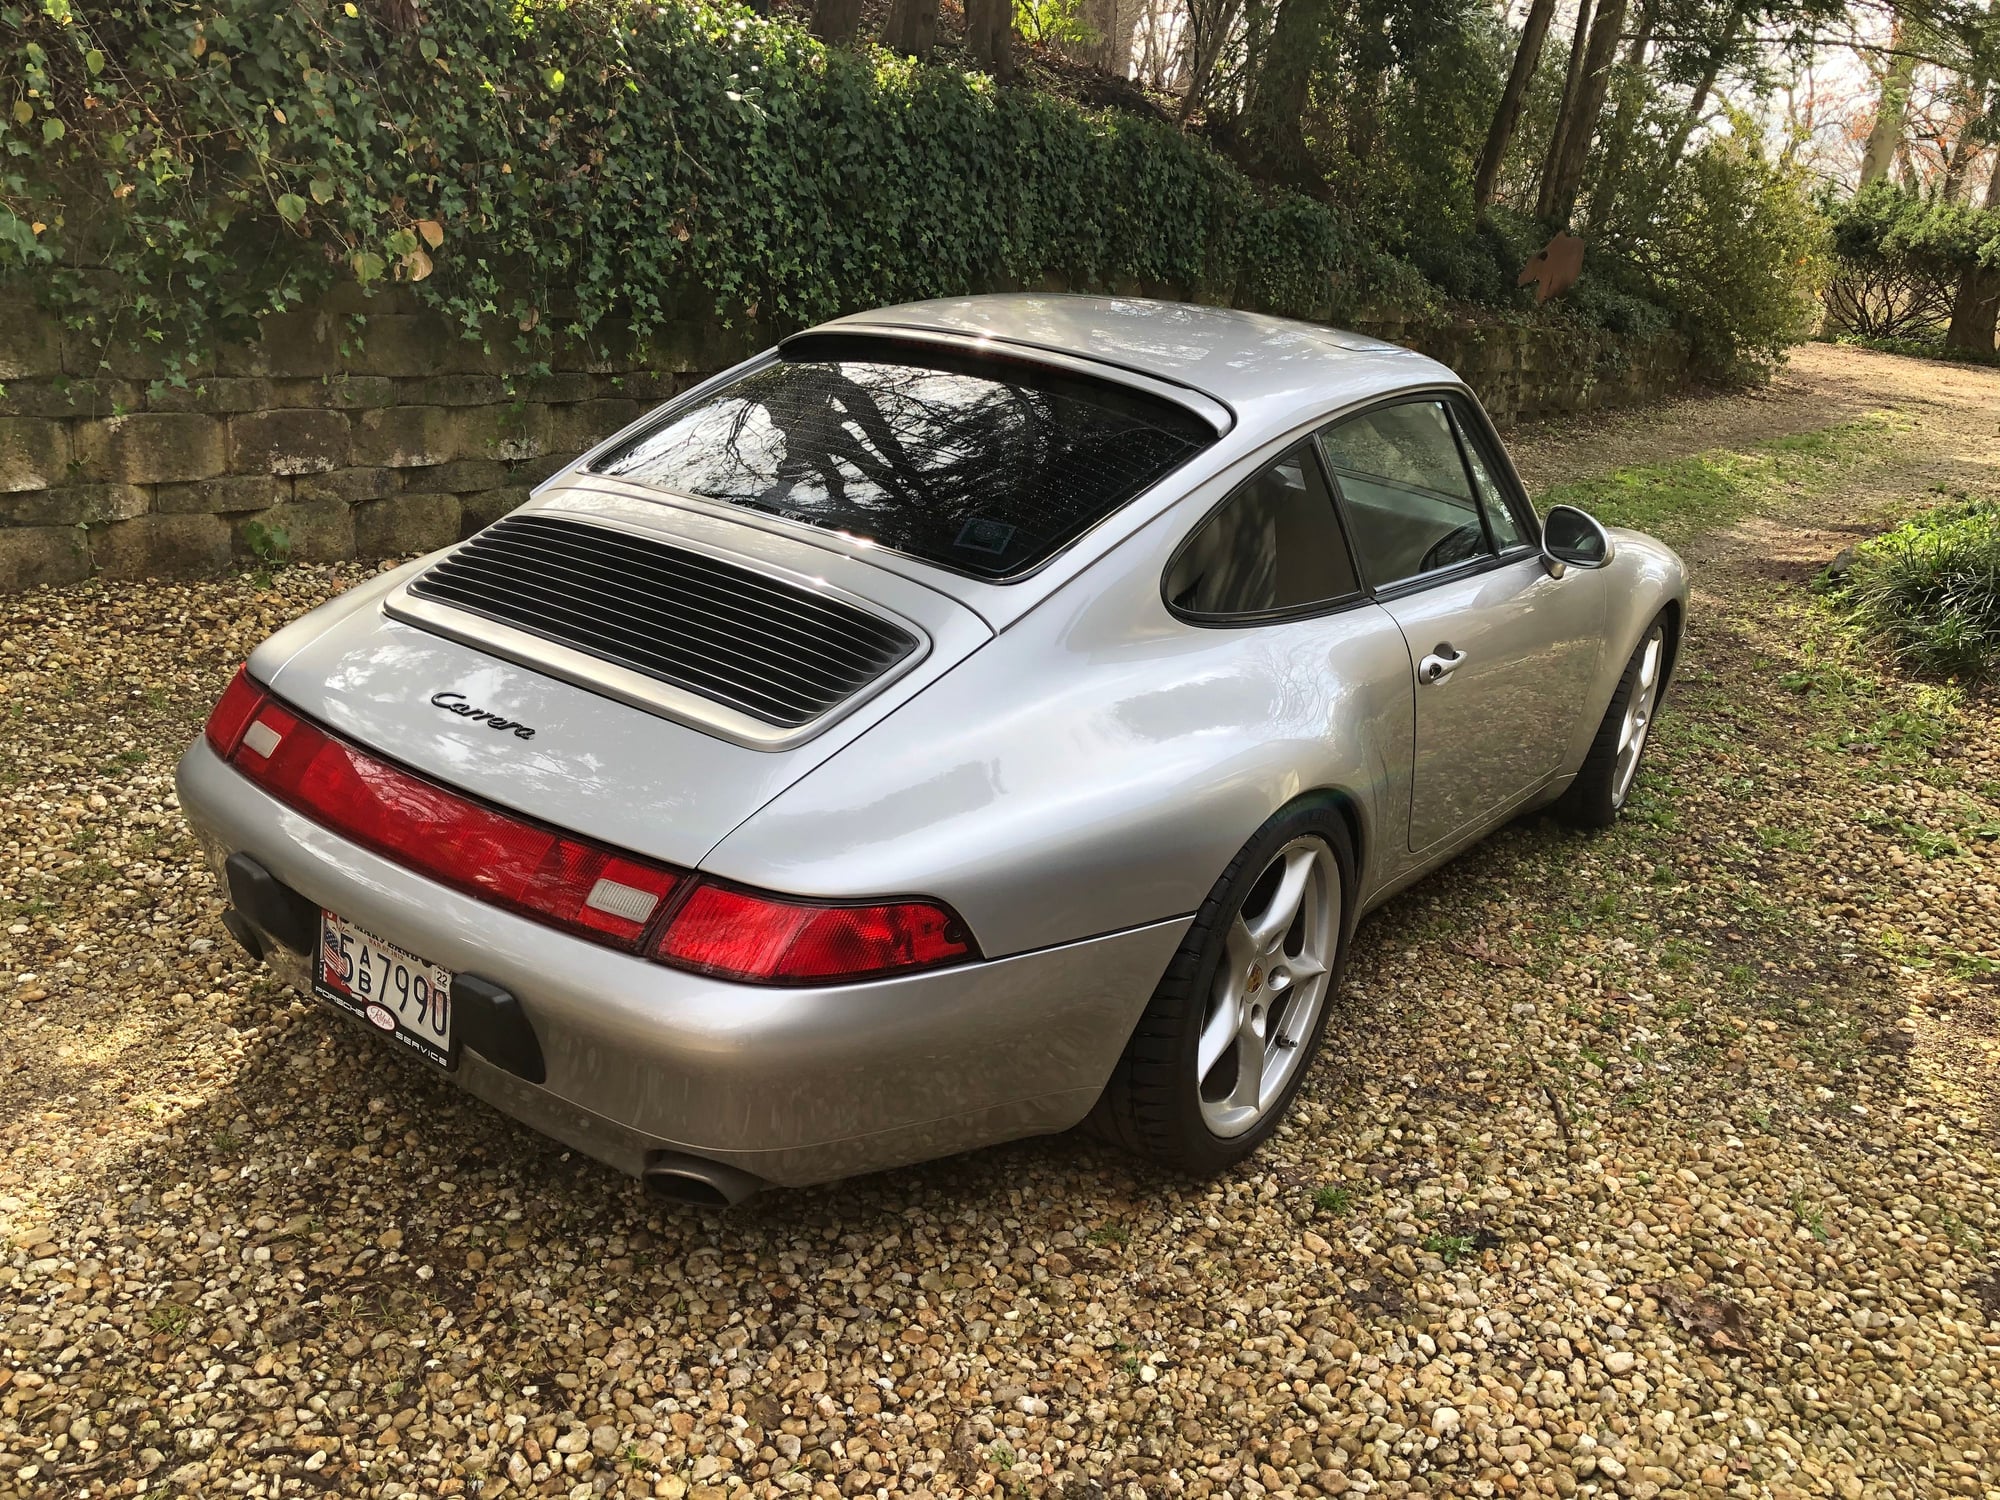 1997 Porsche 911 - 1997 911 993 C2 Arctic Silver w recent top-end rebuild - Used - VIN WP0AA2997VS320619 - 6 cyl - 2WD - Manual - Coupe - Silver - Baltimore, MD 21210, United States